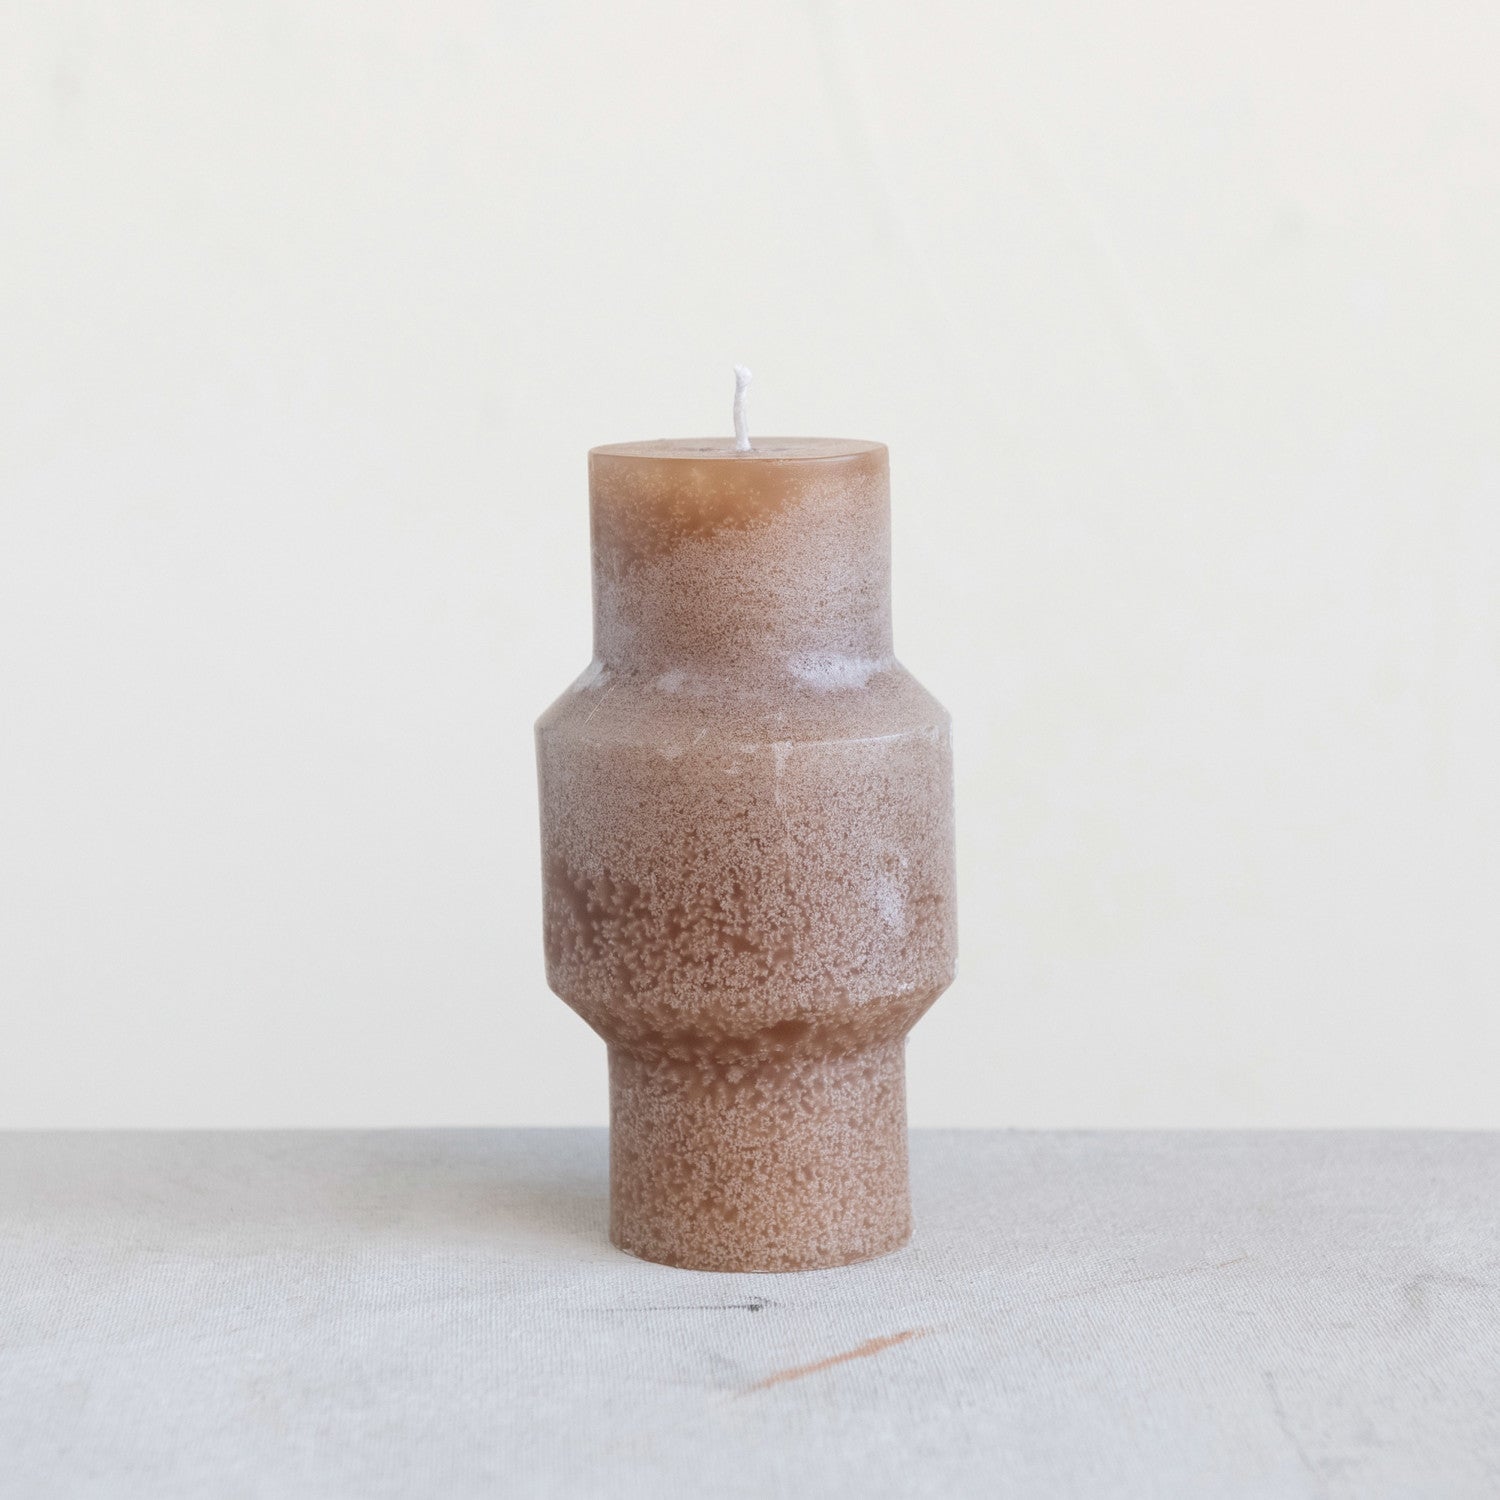 Unscented Totem Pillar Candle, Cappuccino Color 